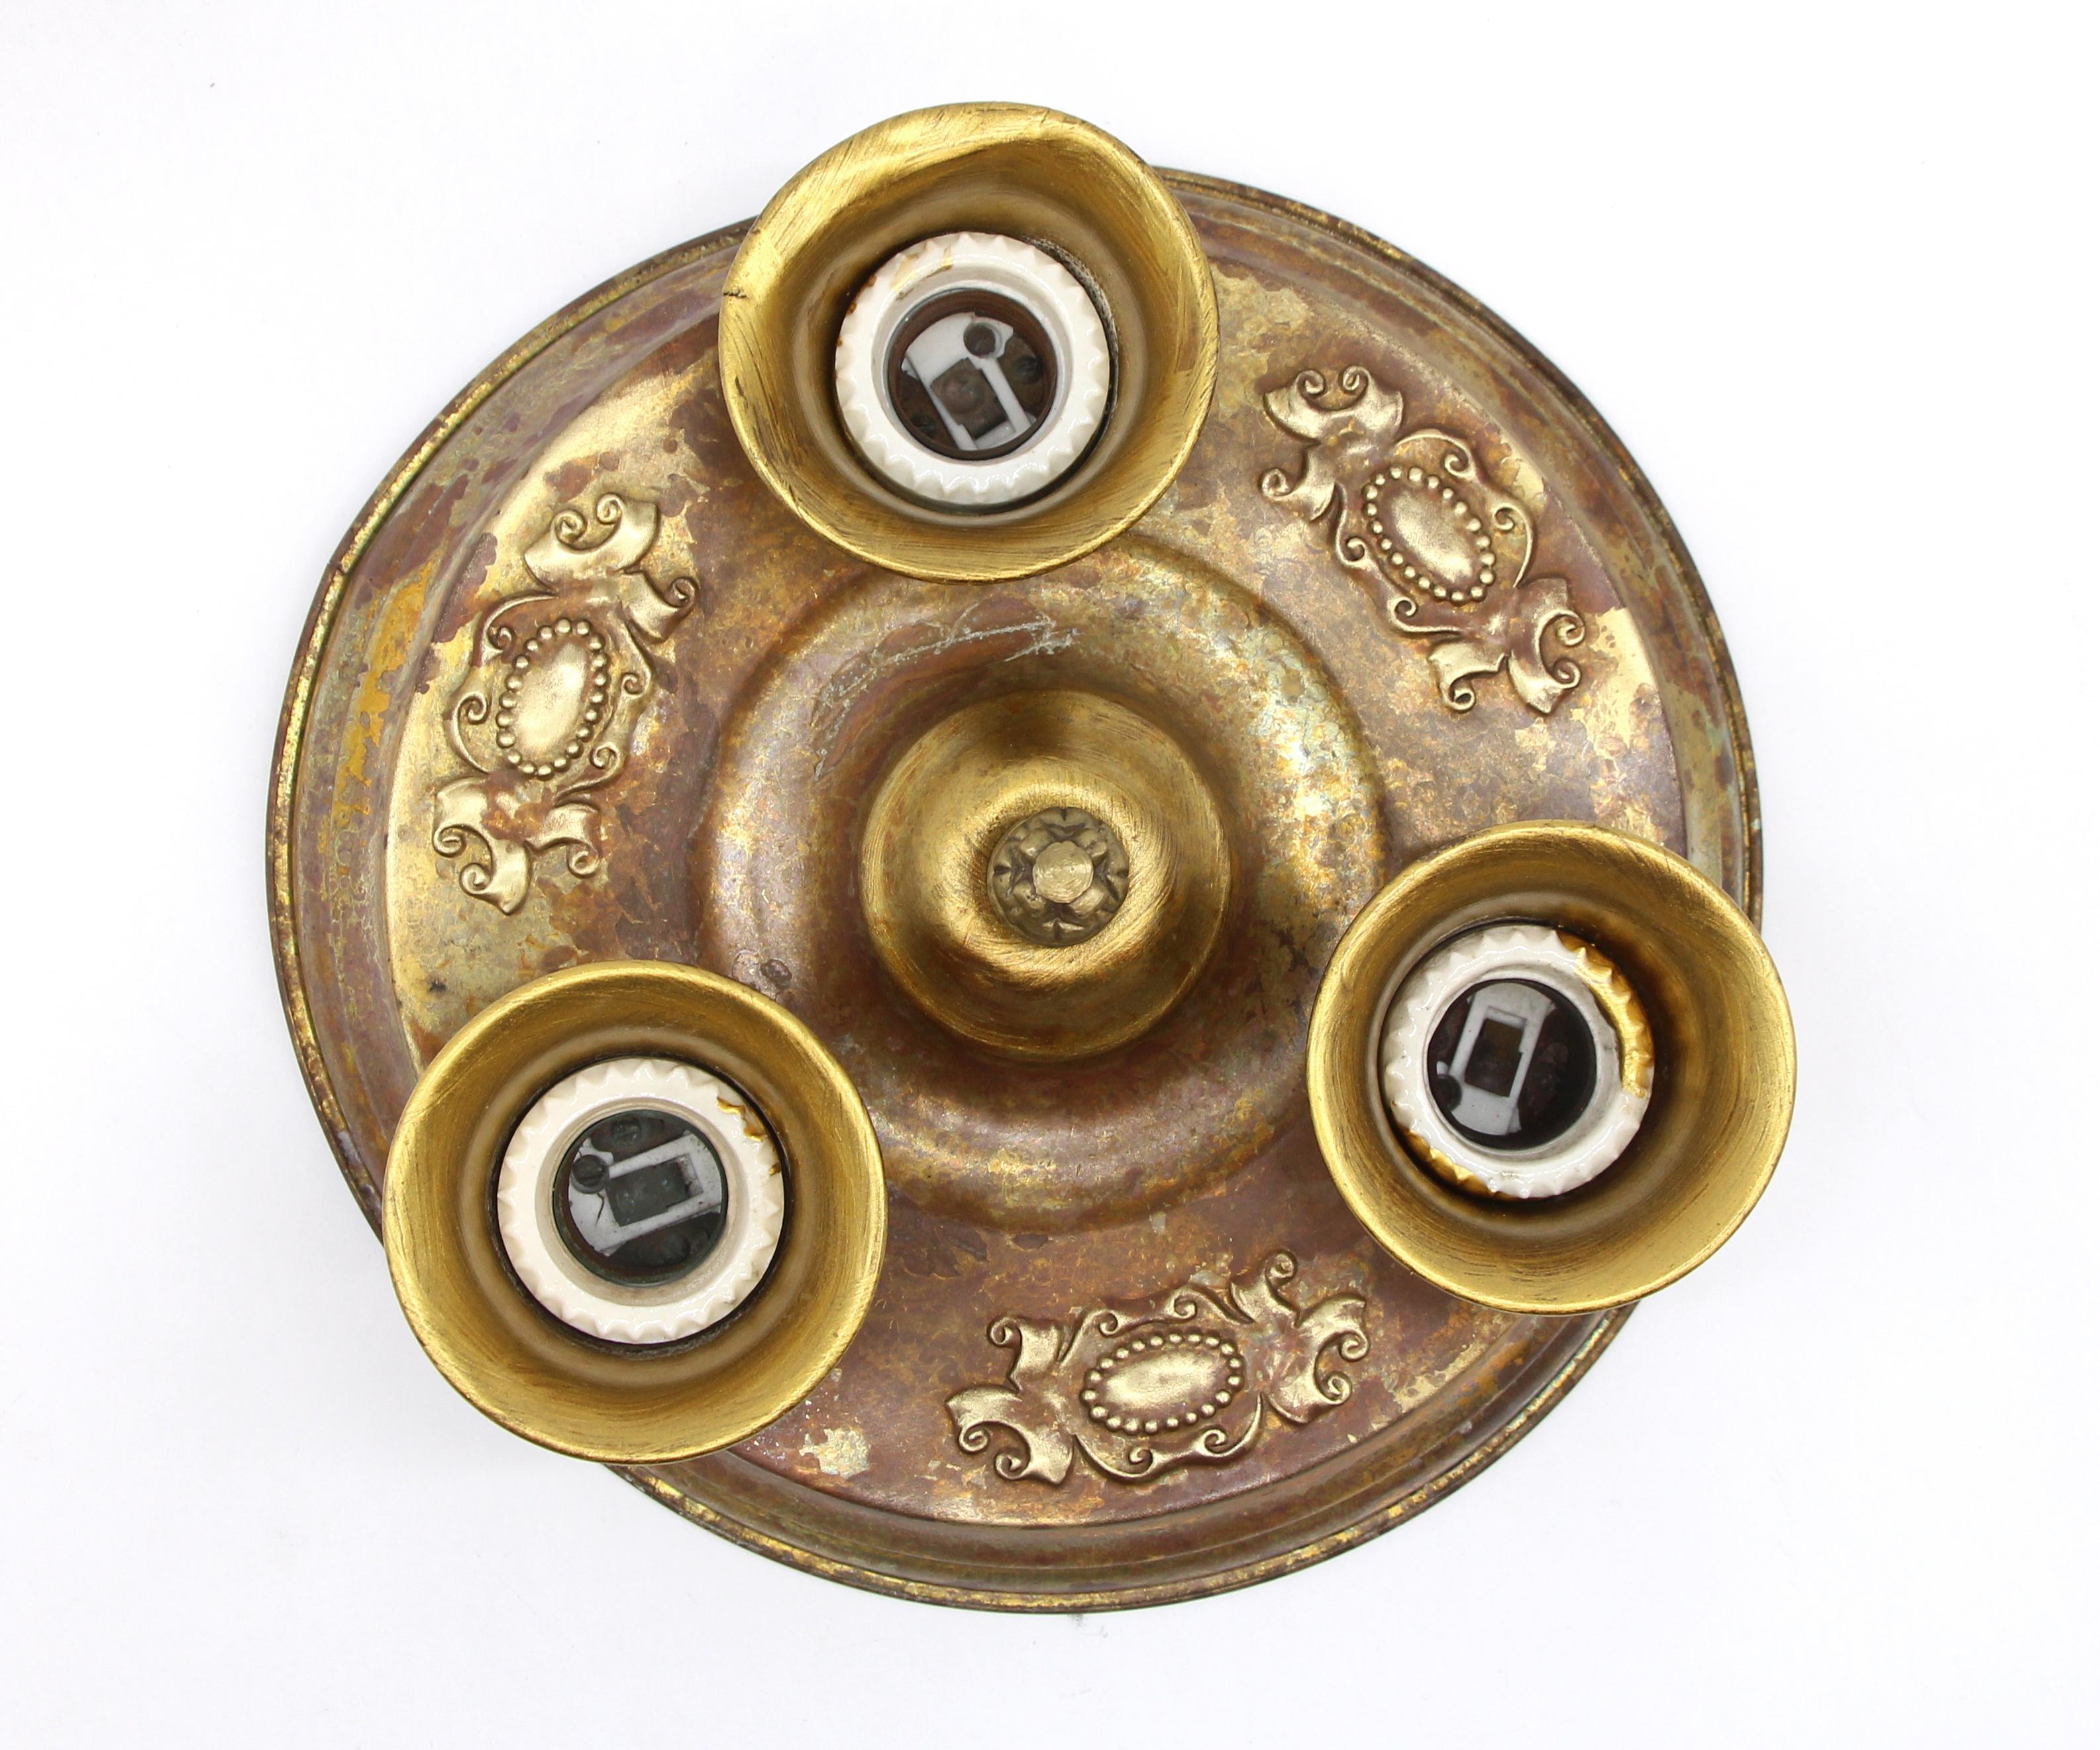 Antique brass ceiling light fixture with three sockets and ornate detail. It is made with pressed brass and dates to around the 1930s. Original patina. This can be seen at our 400 Gilligan St location in Scranton, PA.